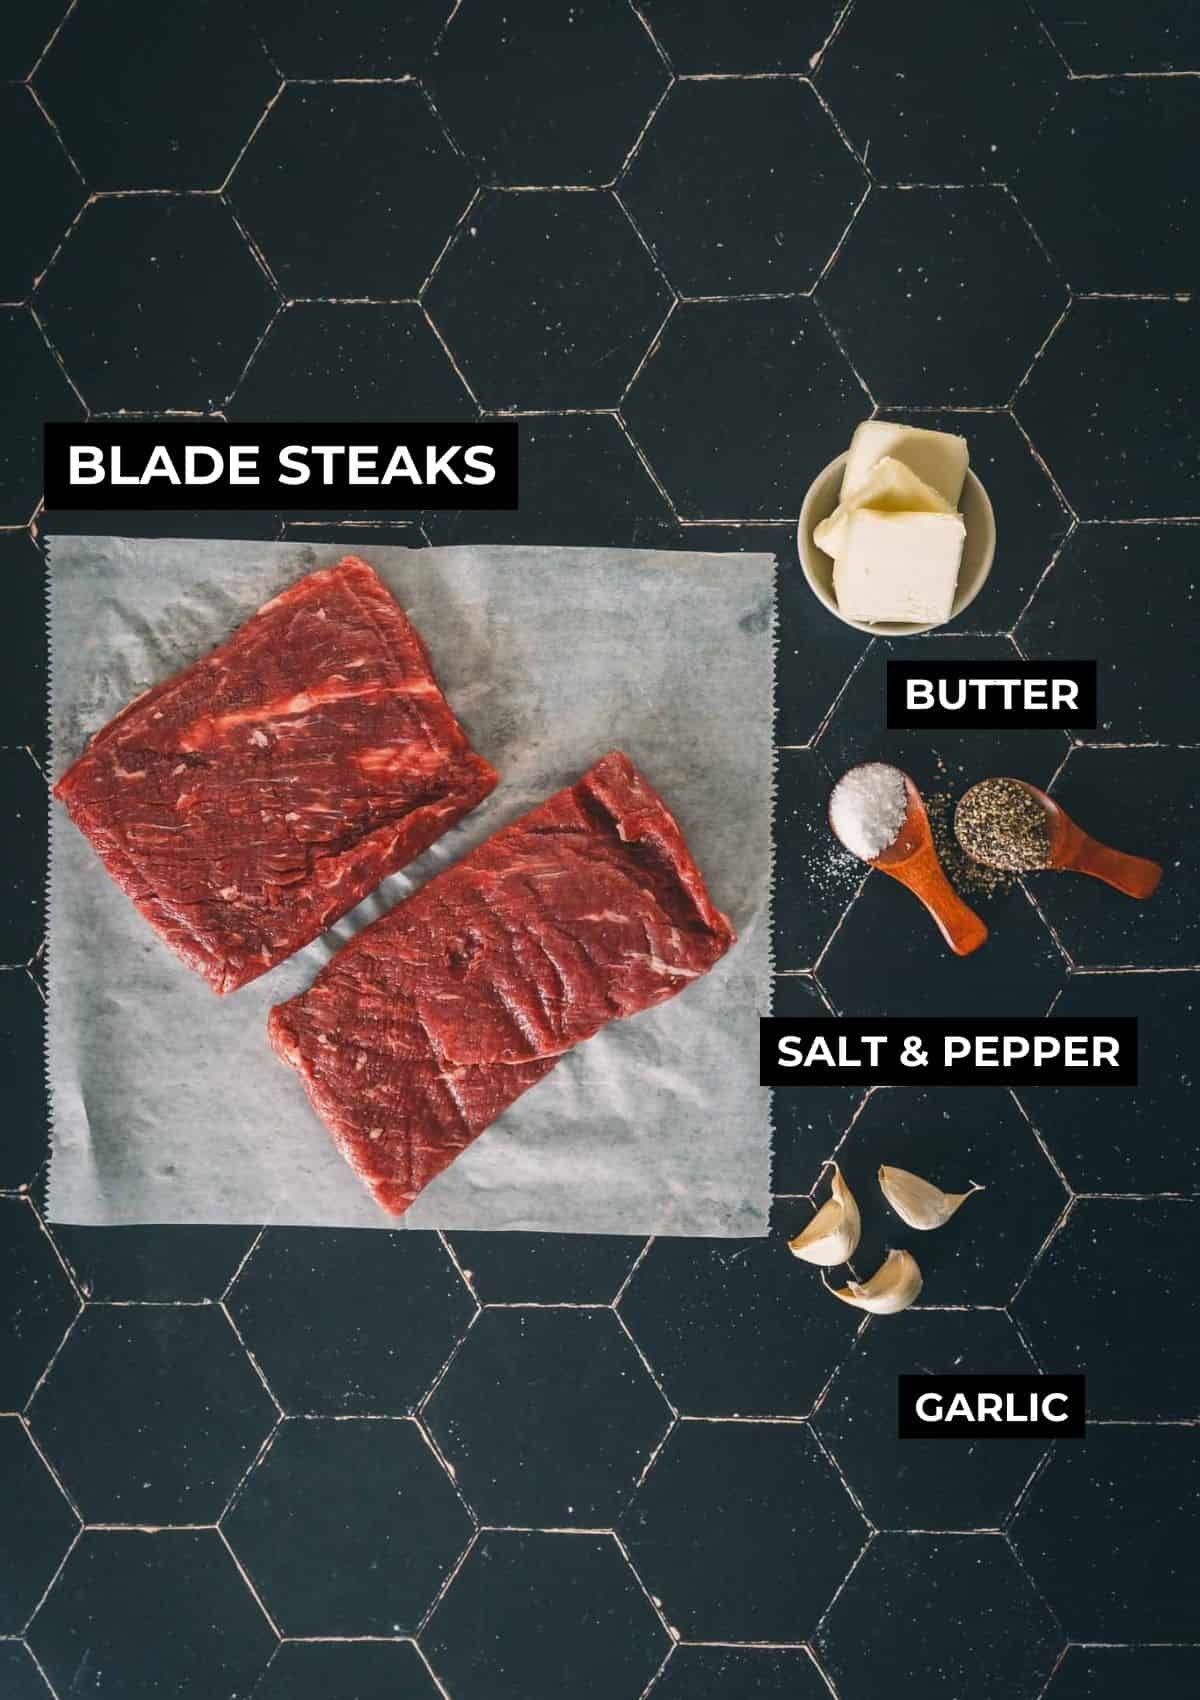 Ingredients for cooking blade steaks in cast iron.